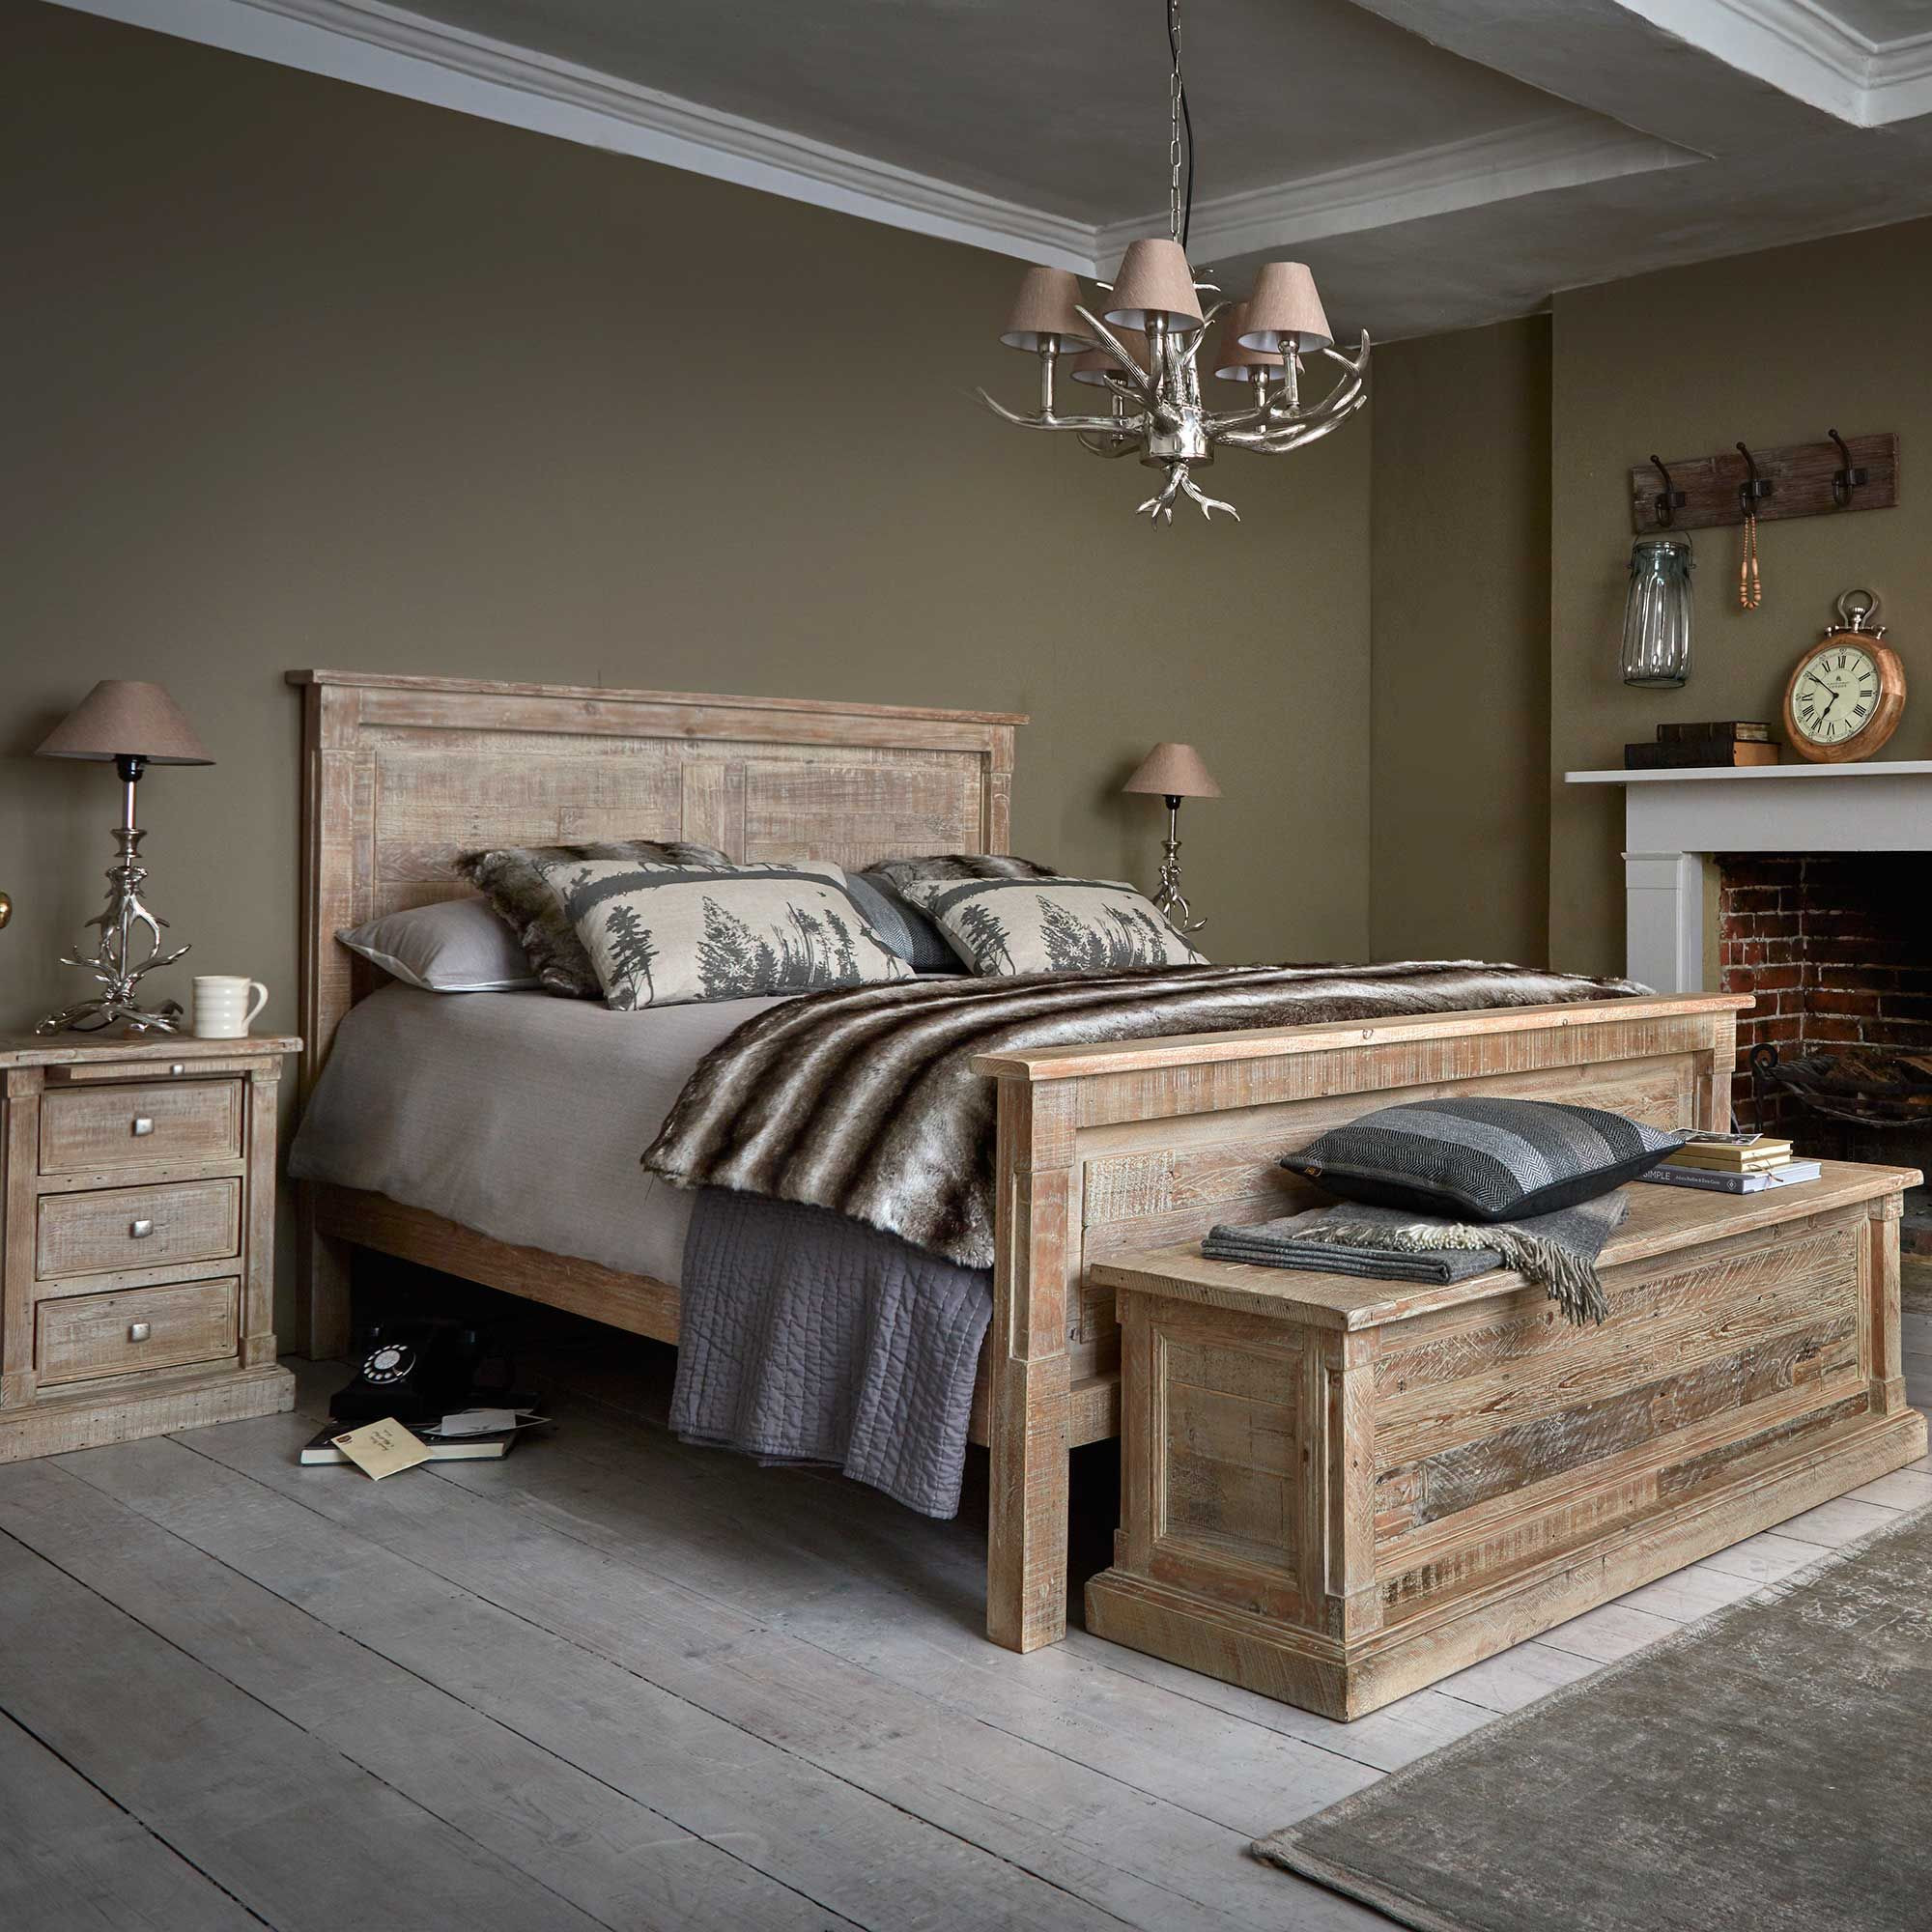 Rustic White Bedroom Furniture
 The Austen Bed Frame is made from reclaimed wood with a